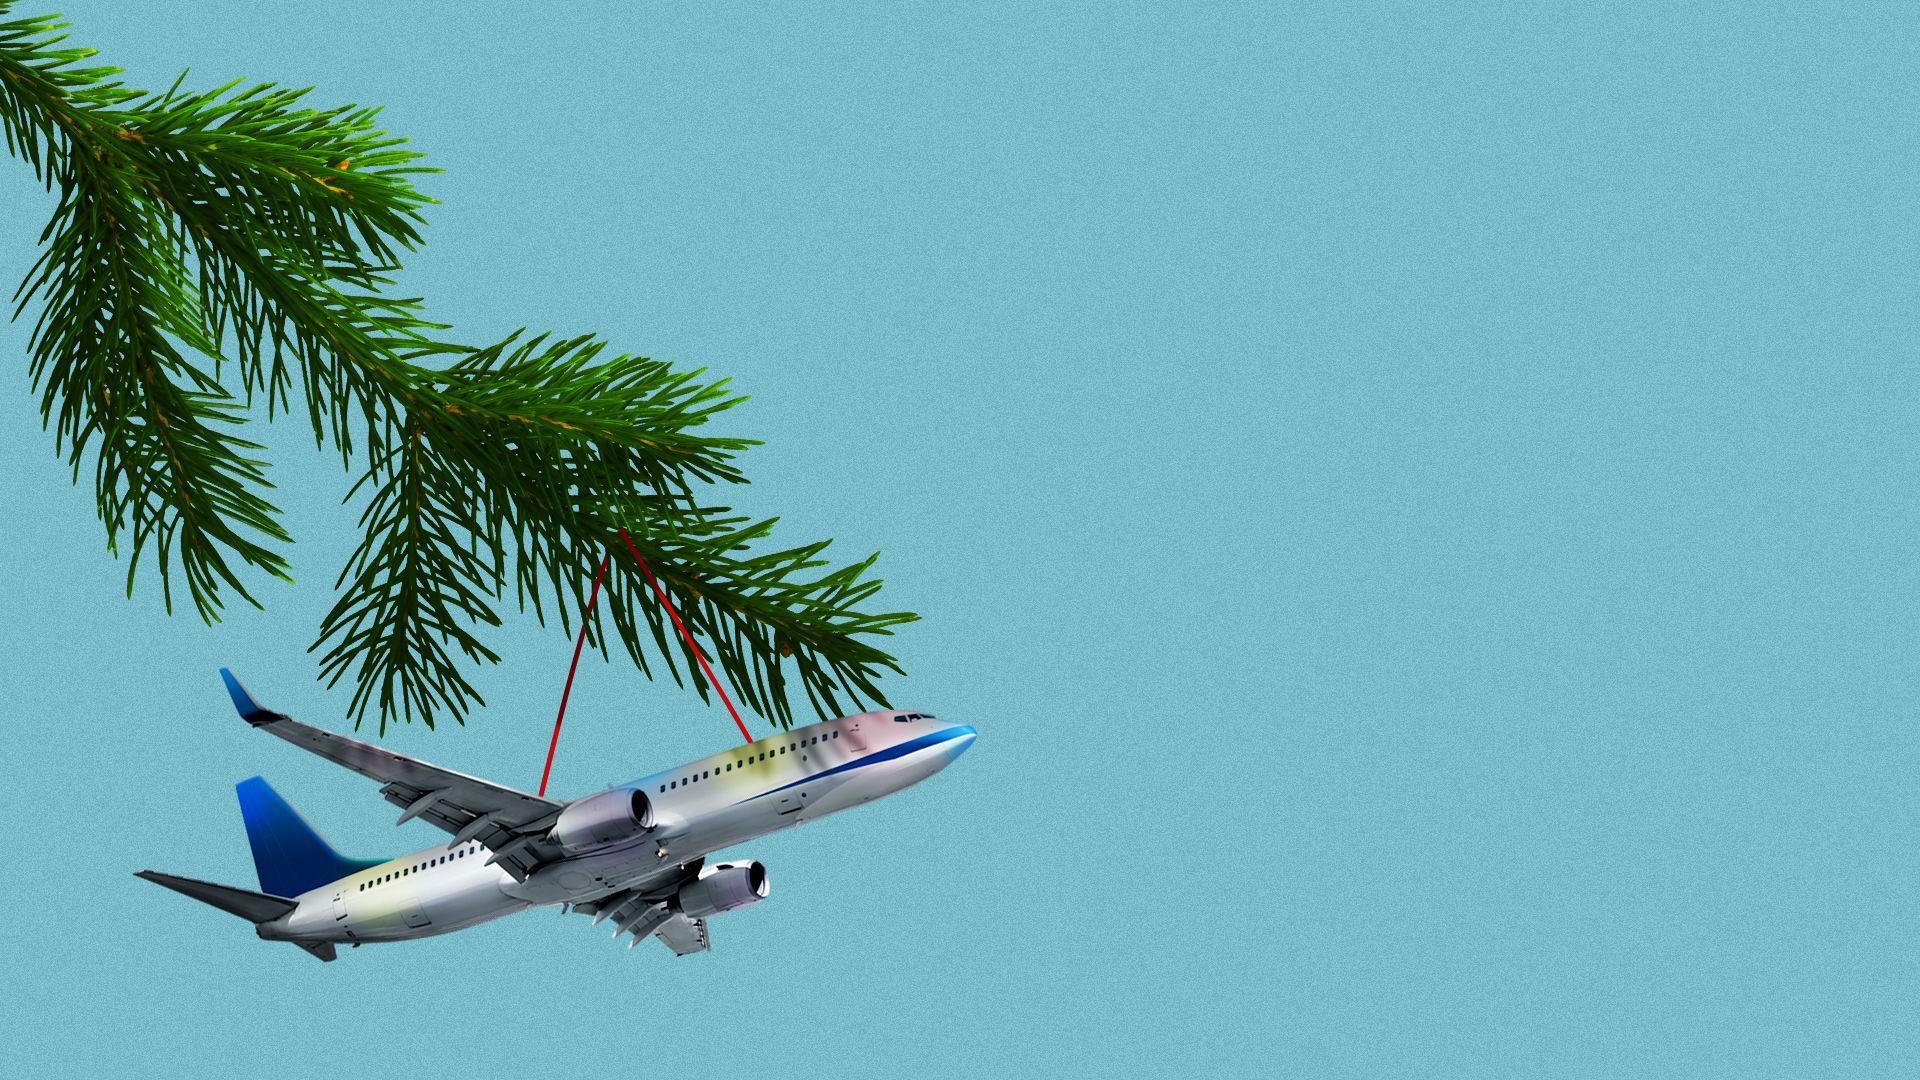 Illustration of a plane as a small ornament hanging from a tree